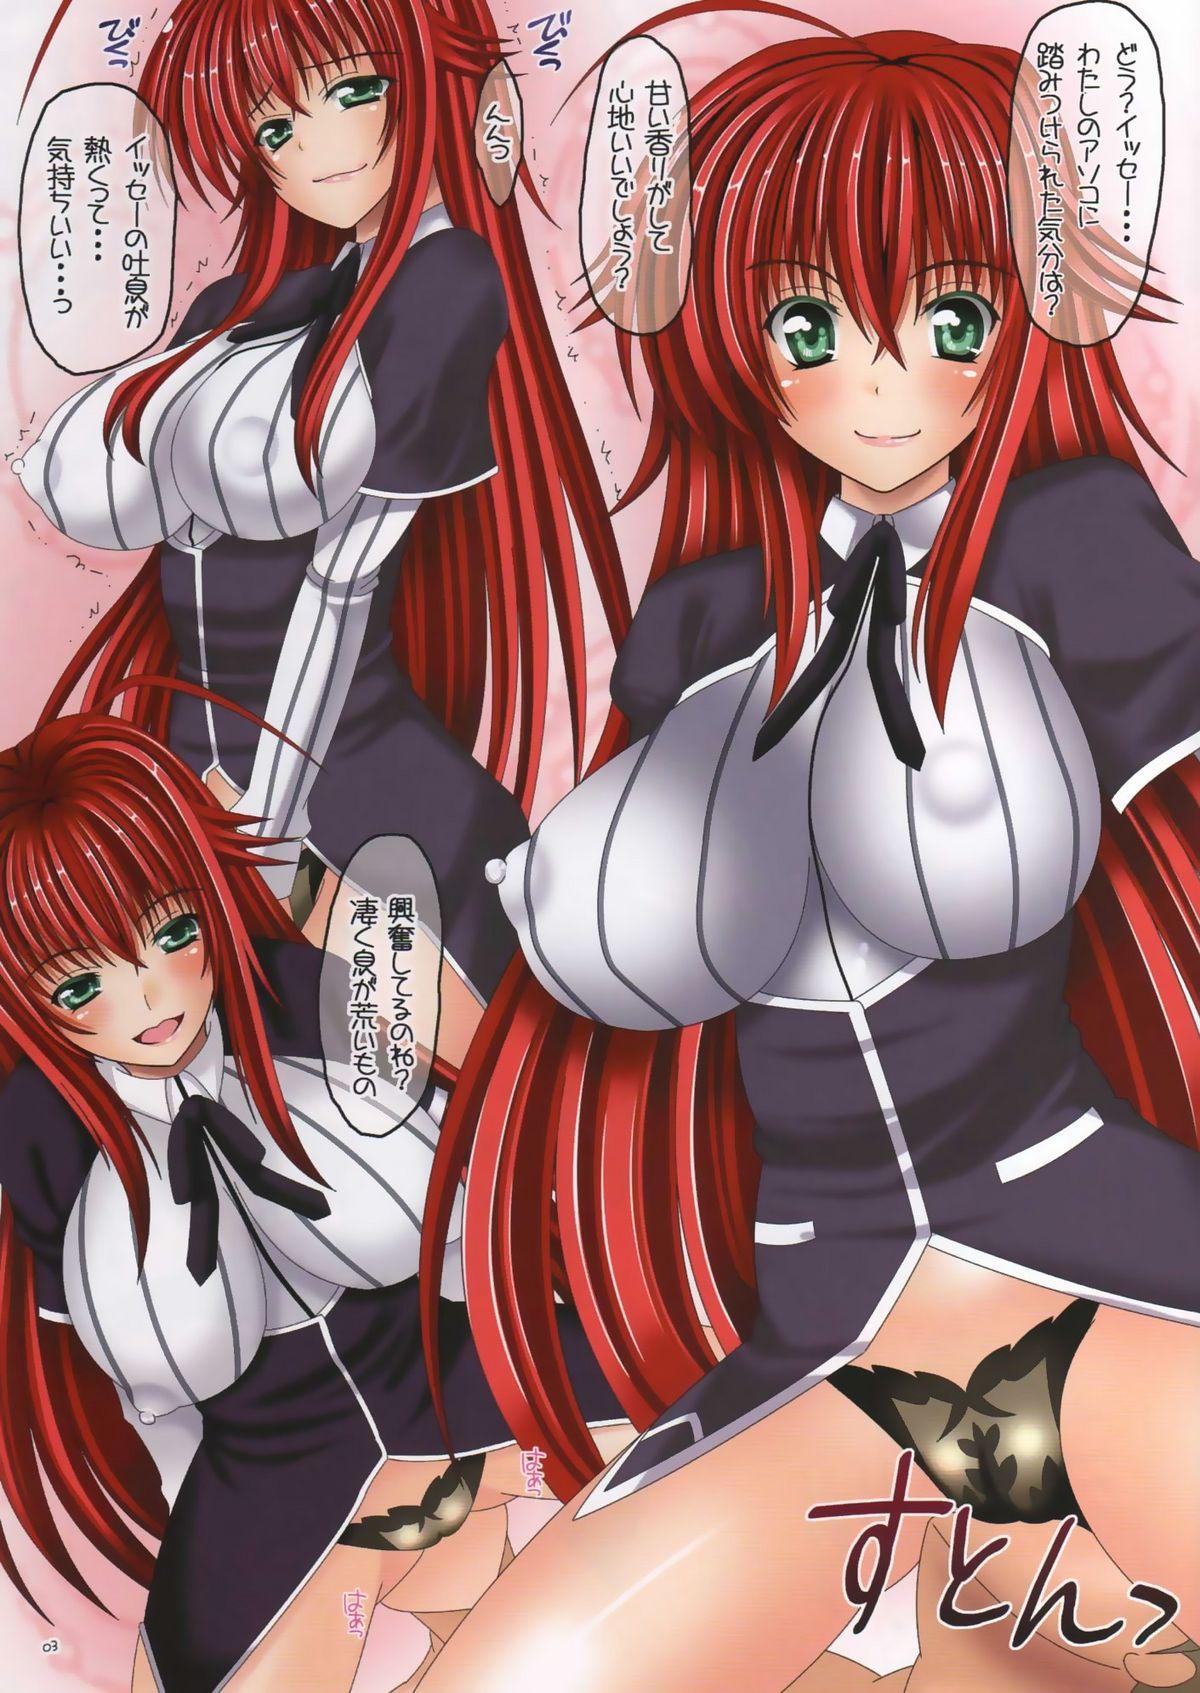 Chichona Colorful DxD - Highschool dxd Missionary Position Porn - Page 2